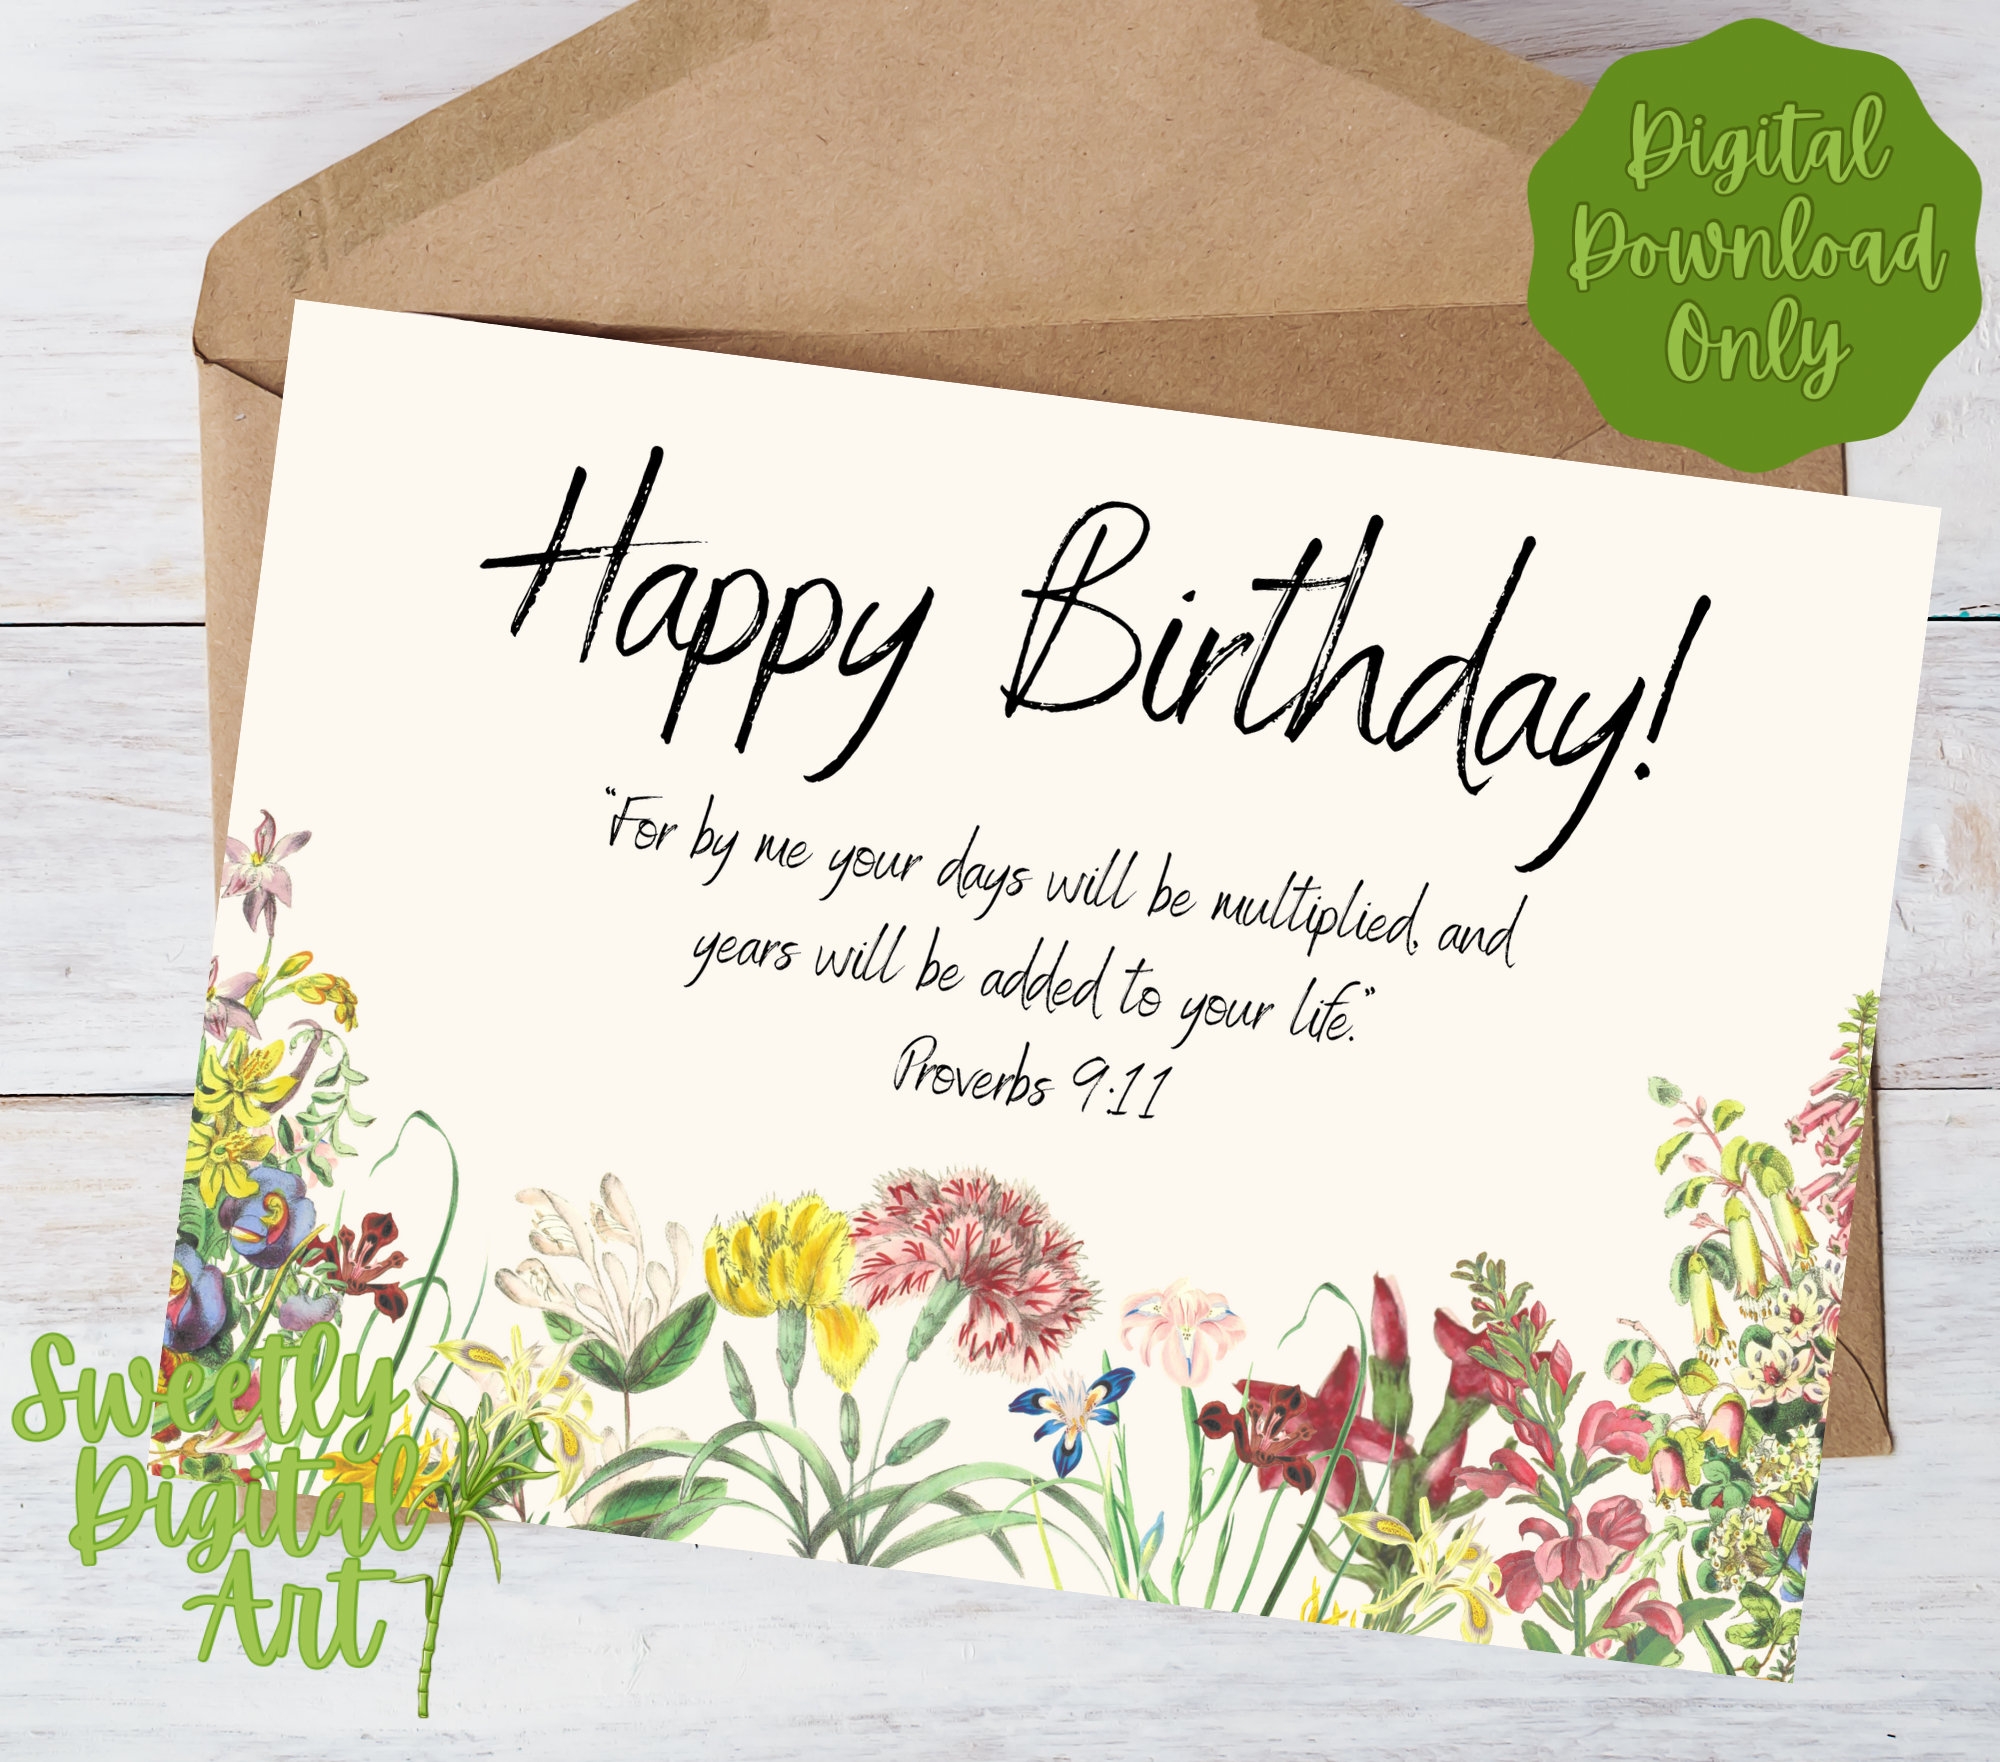 Printable Christian Birthday Card With Bible Verse Happy Birthday Instant Download Download And Print This Birthday Card Today Proverbs Etsy Sweden - Free Printable Christian Birthday Greeting Cards